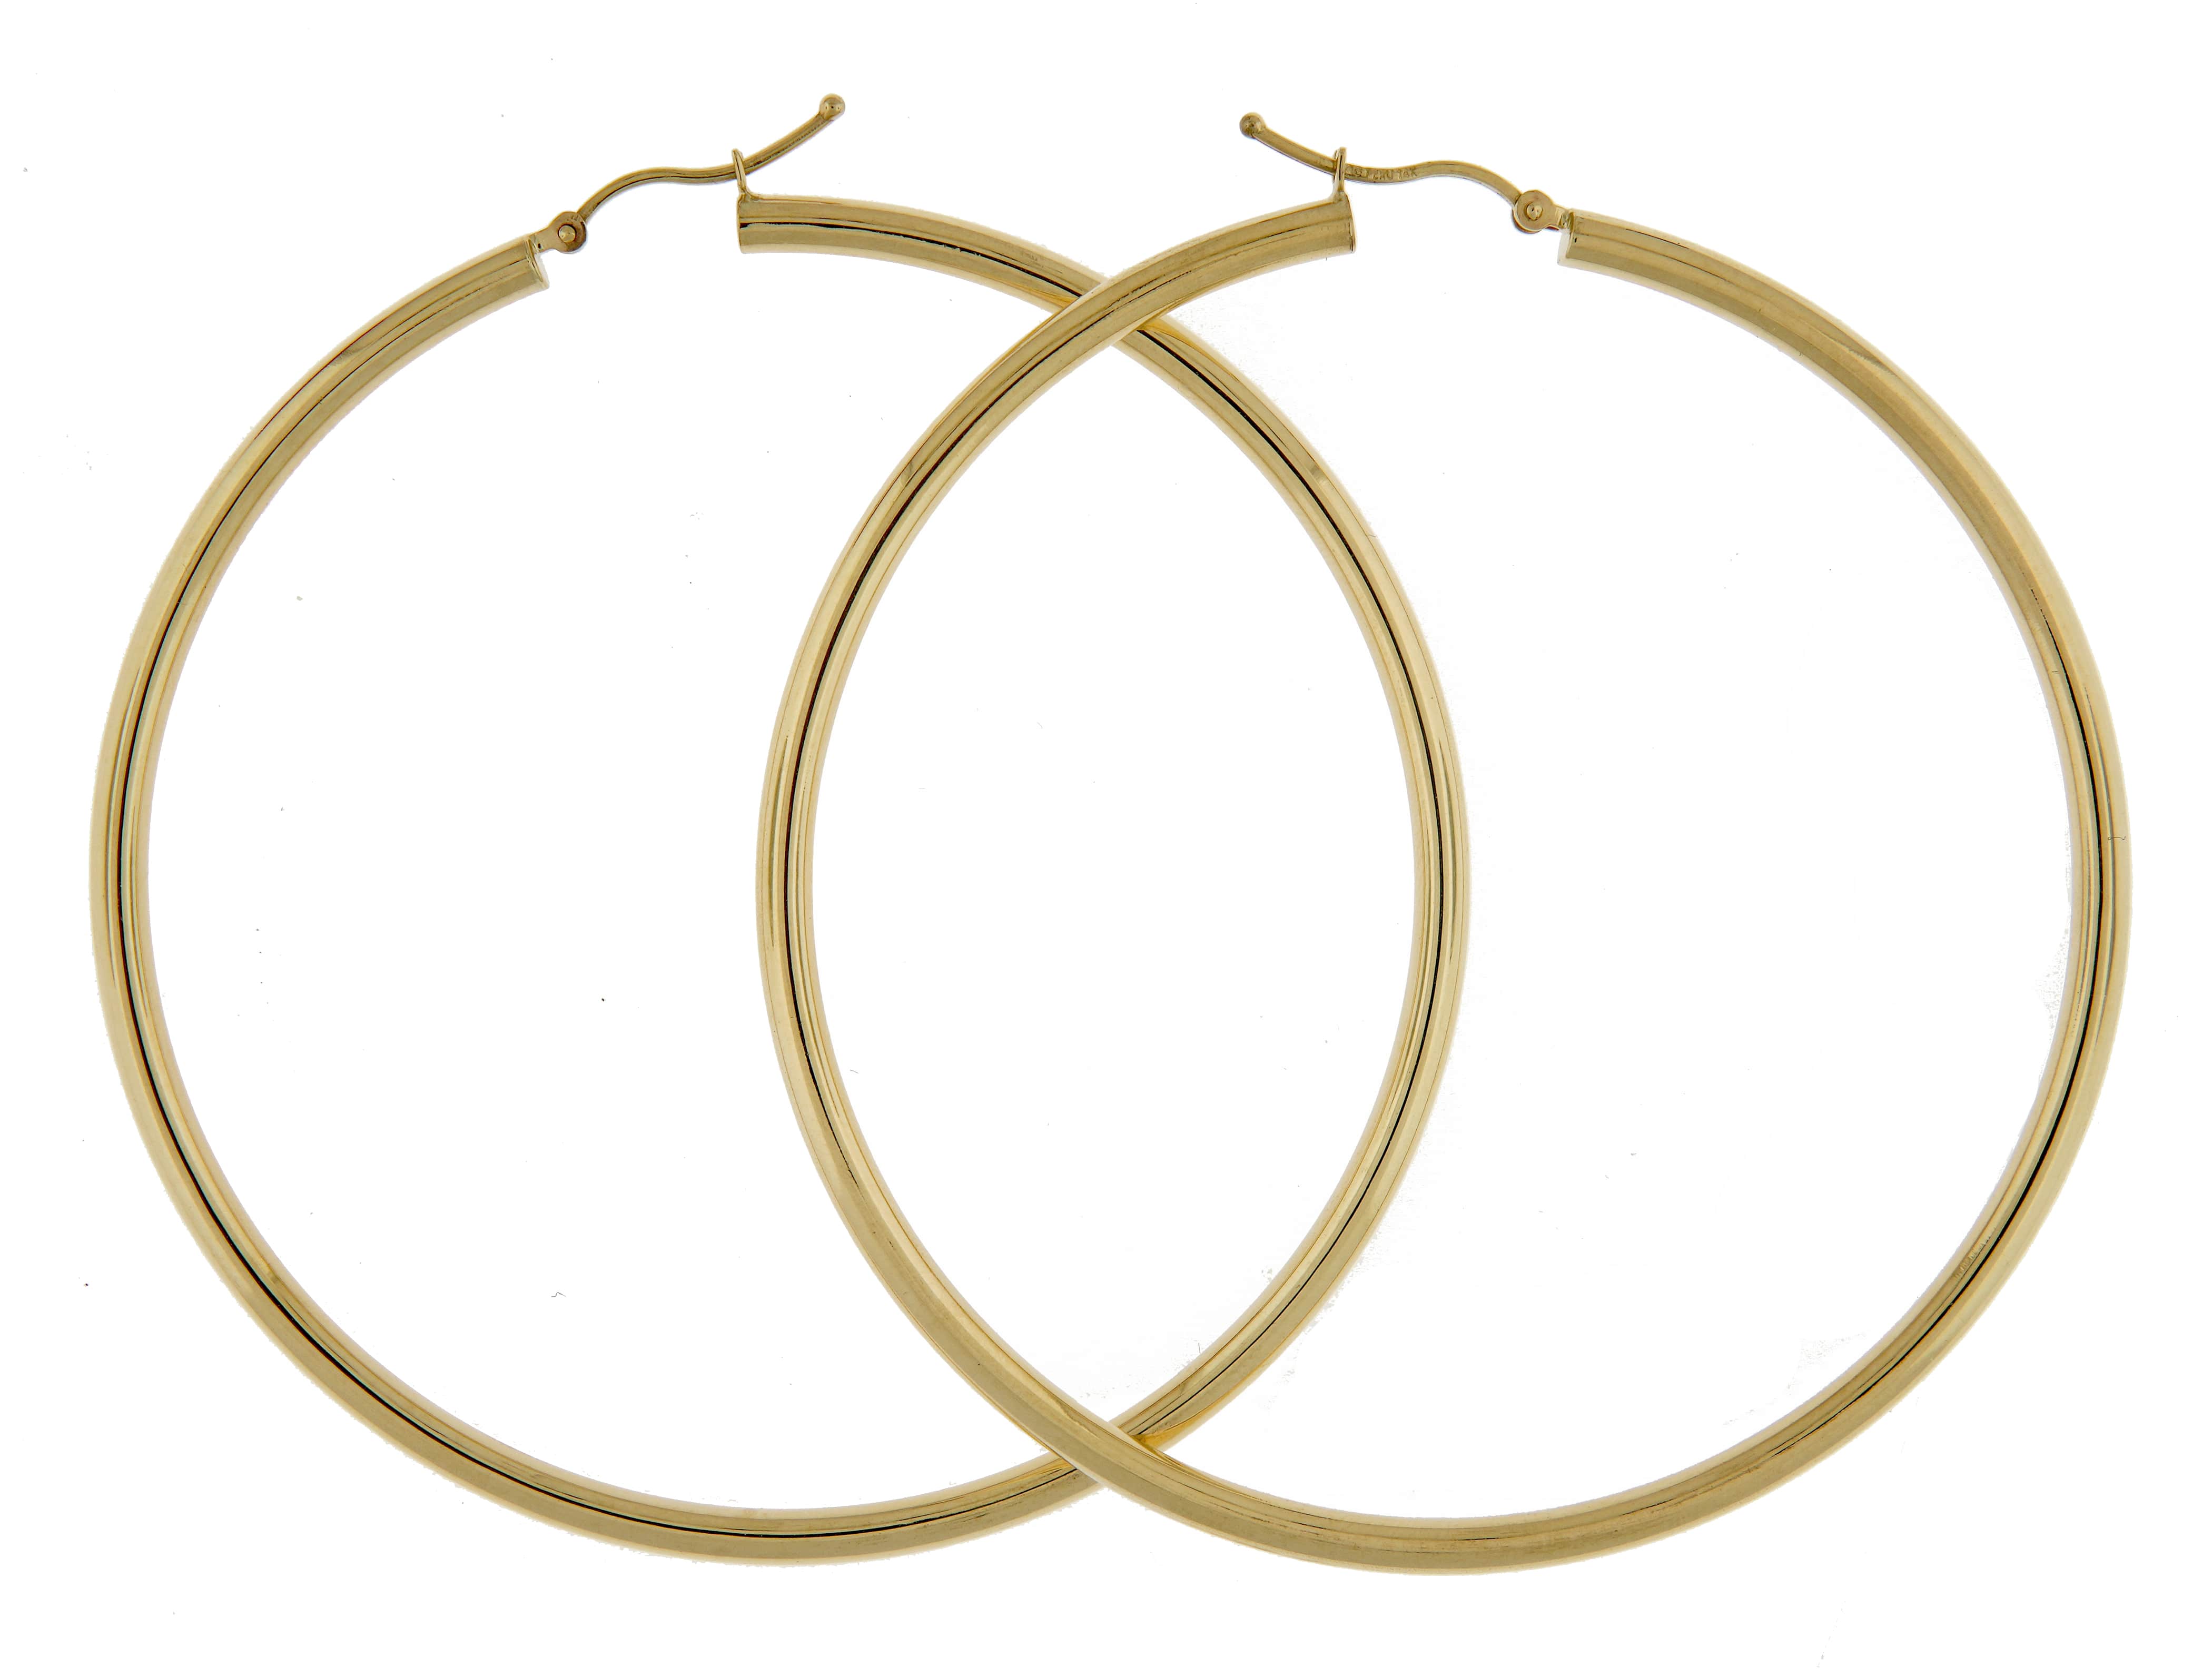 14K Yellow Gold 69mm x 3mm Extra Large Round Classic Hoop Earrings Lightweight